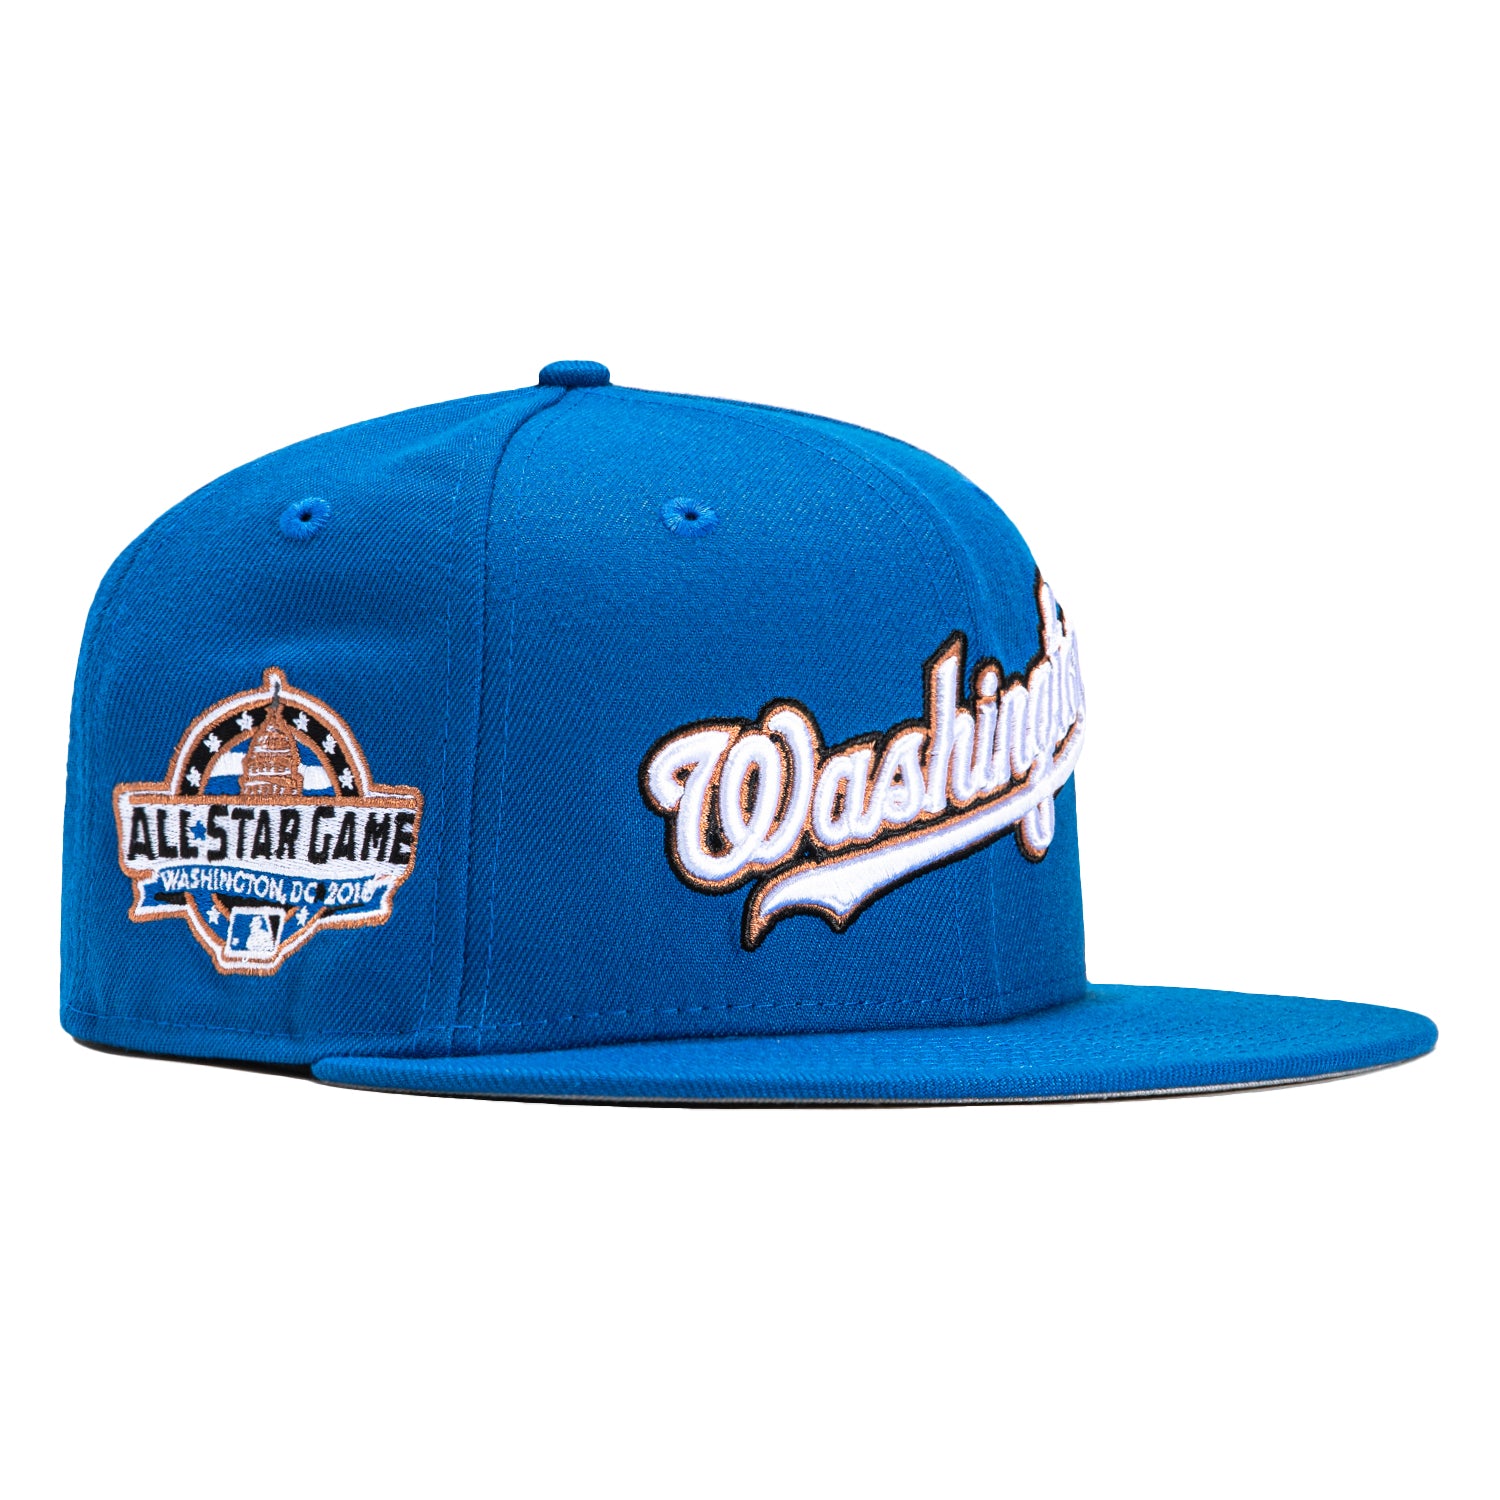 2016 All Star Game Hats from New Era, 59fifty on-field cap